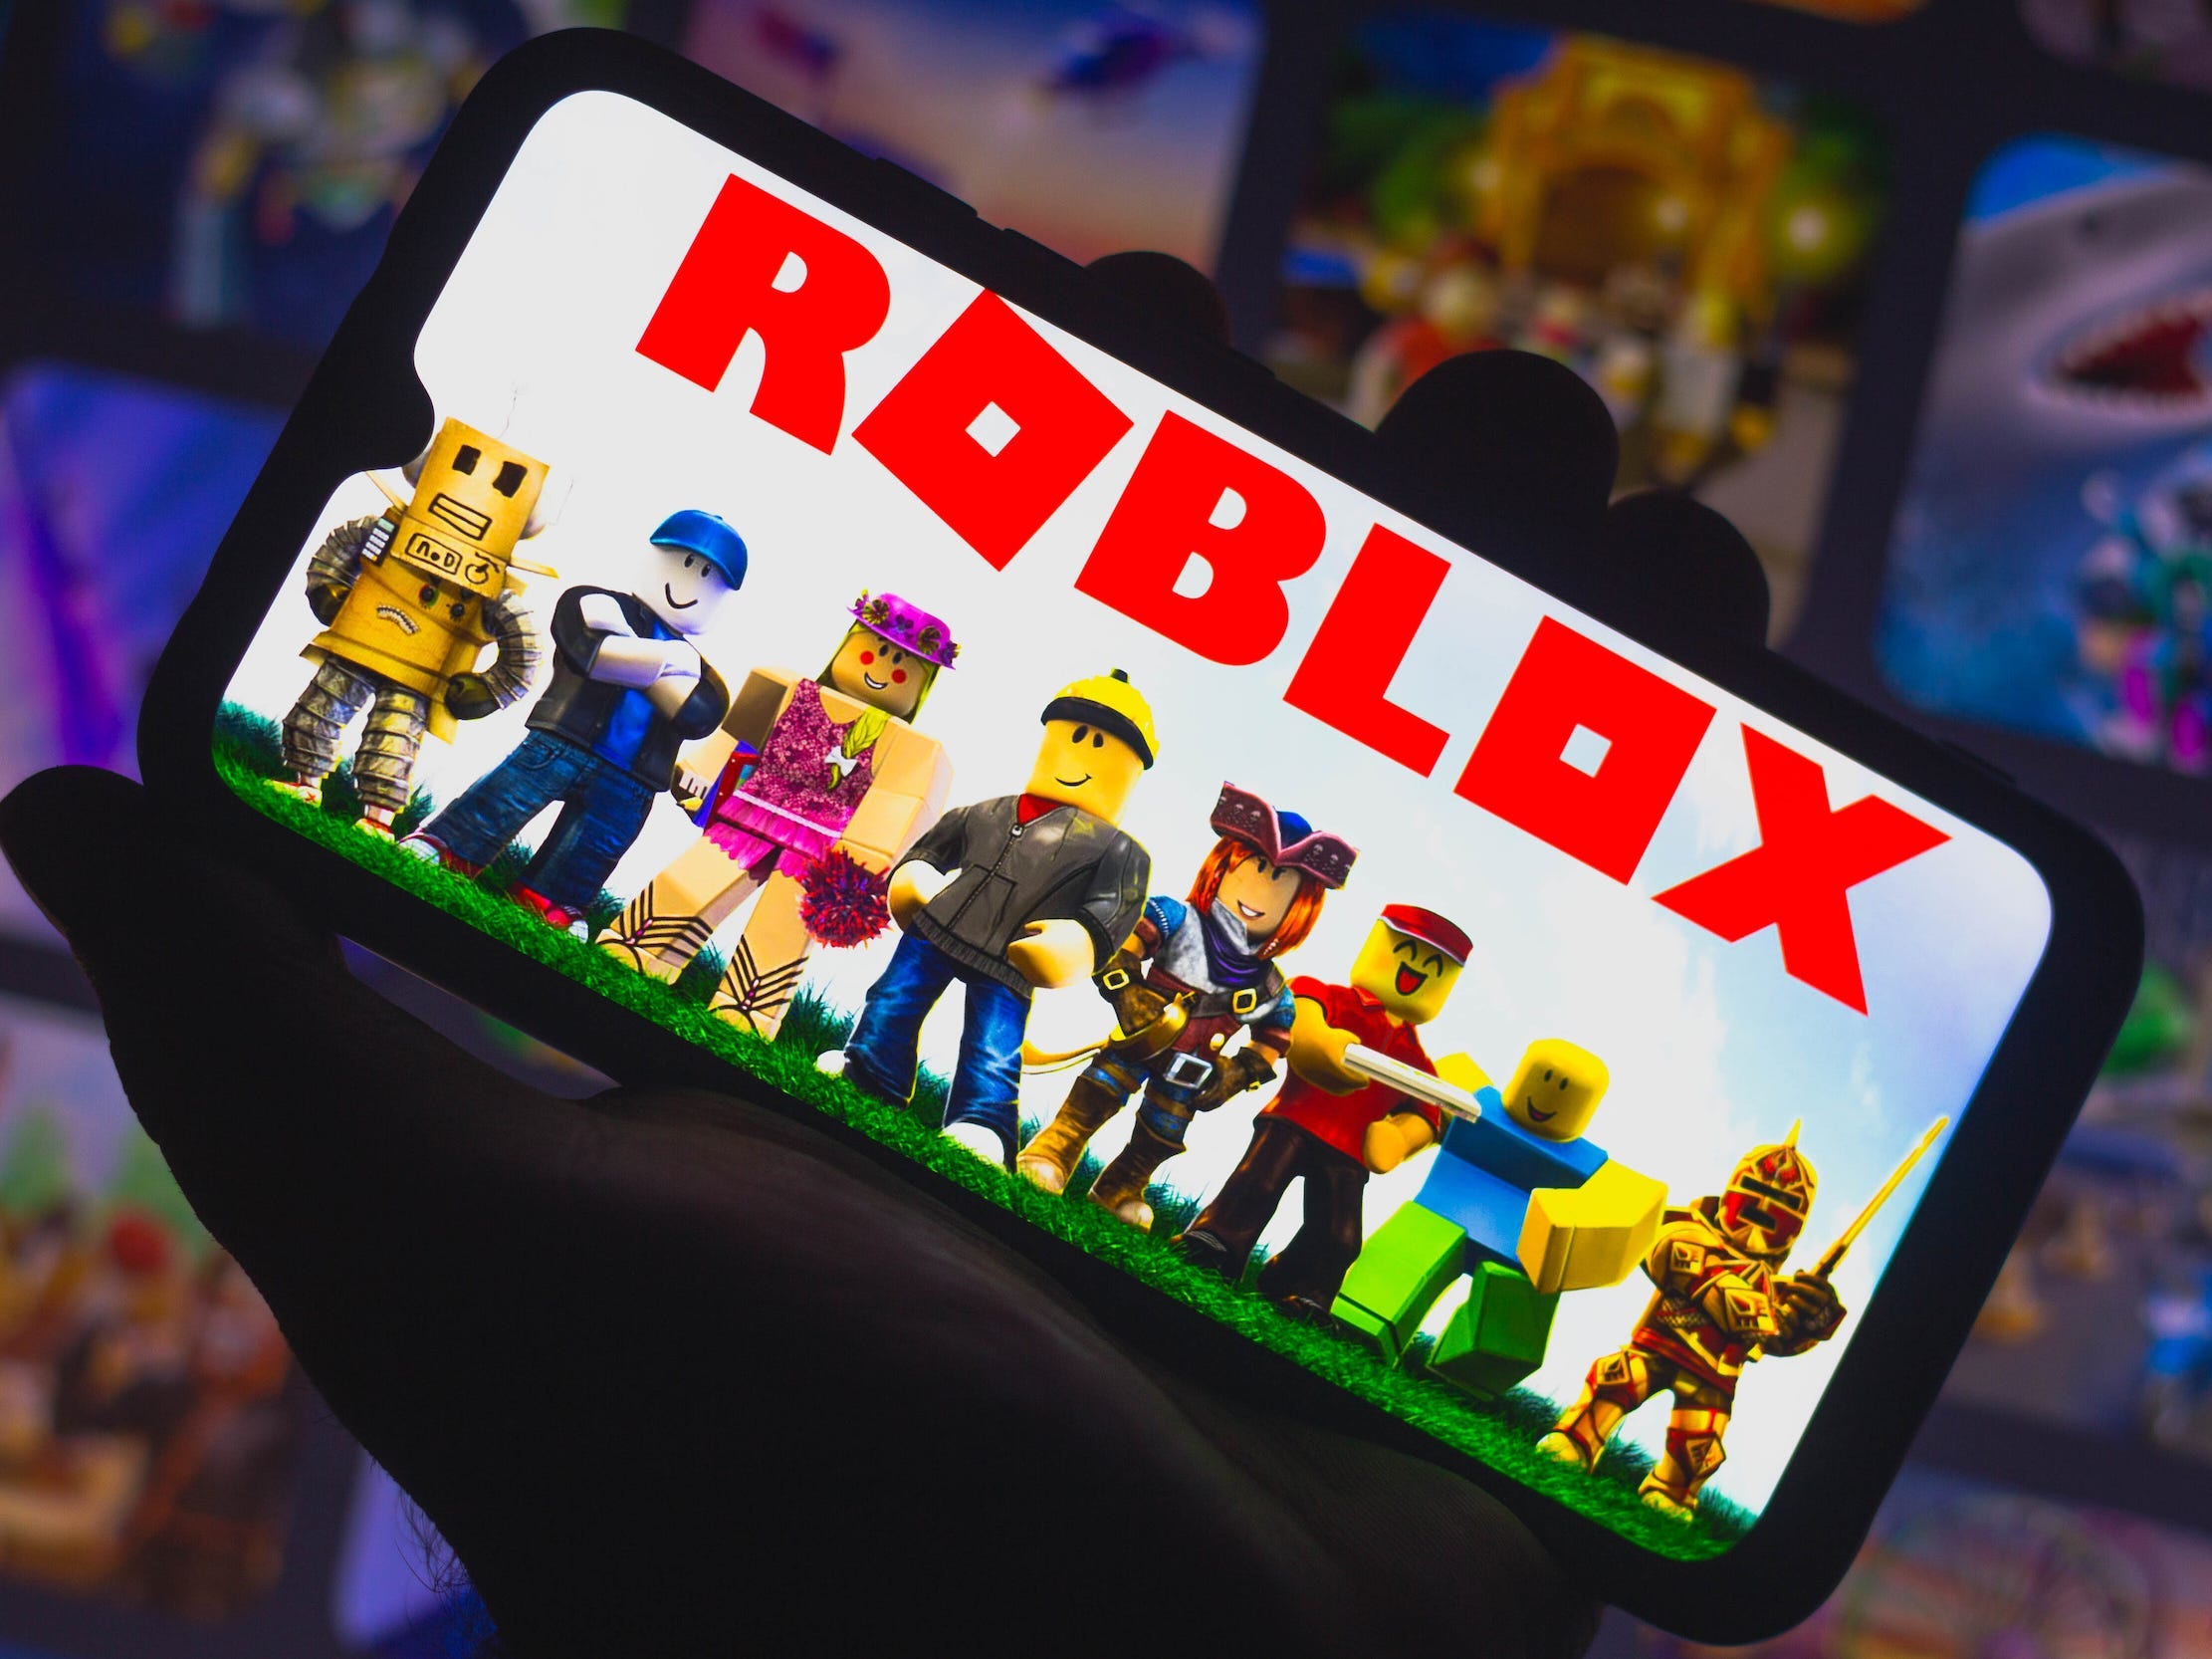 ROBLOX NEWS HOW TO GET A REFUND FROM DELETED STUFF! 